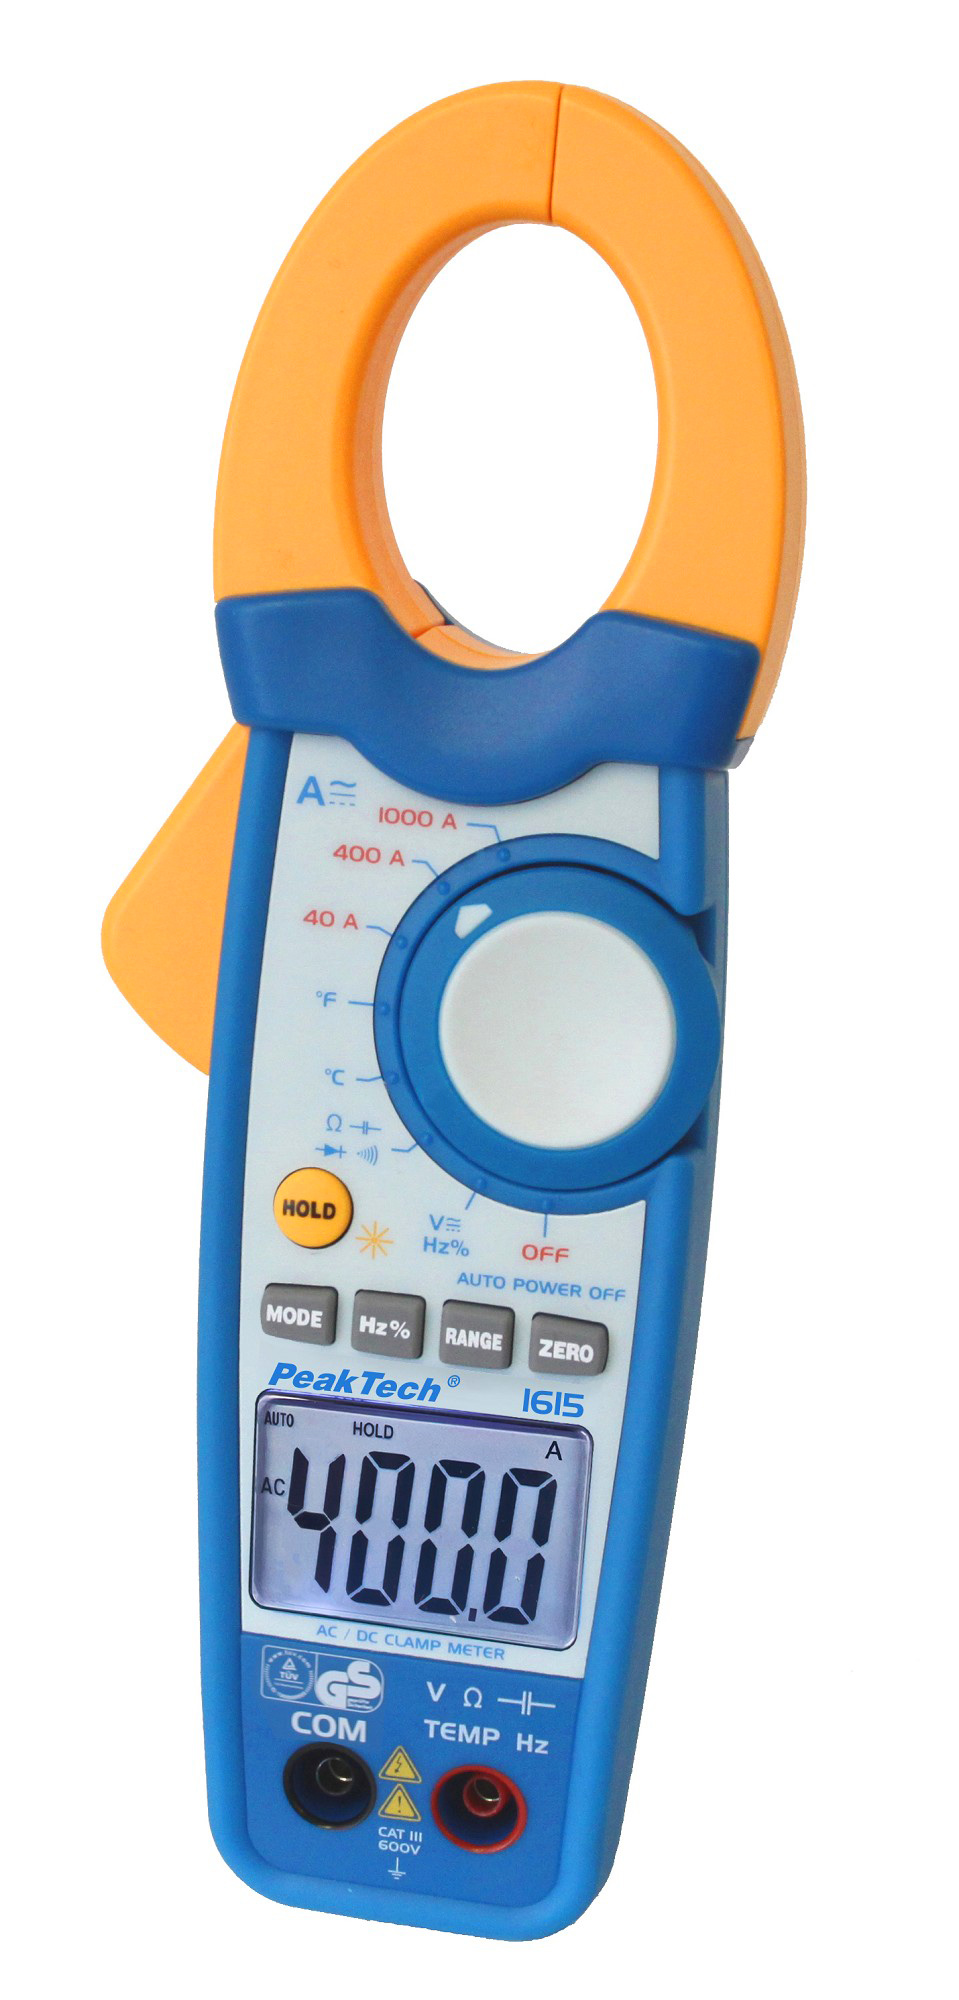 «PeakTech® P 1615» Clamp meter 4,000 counts 1000 A AC/DC